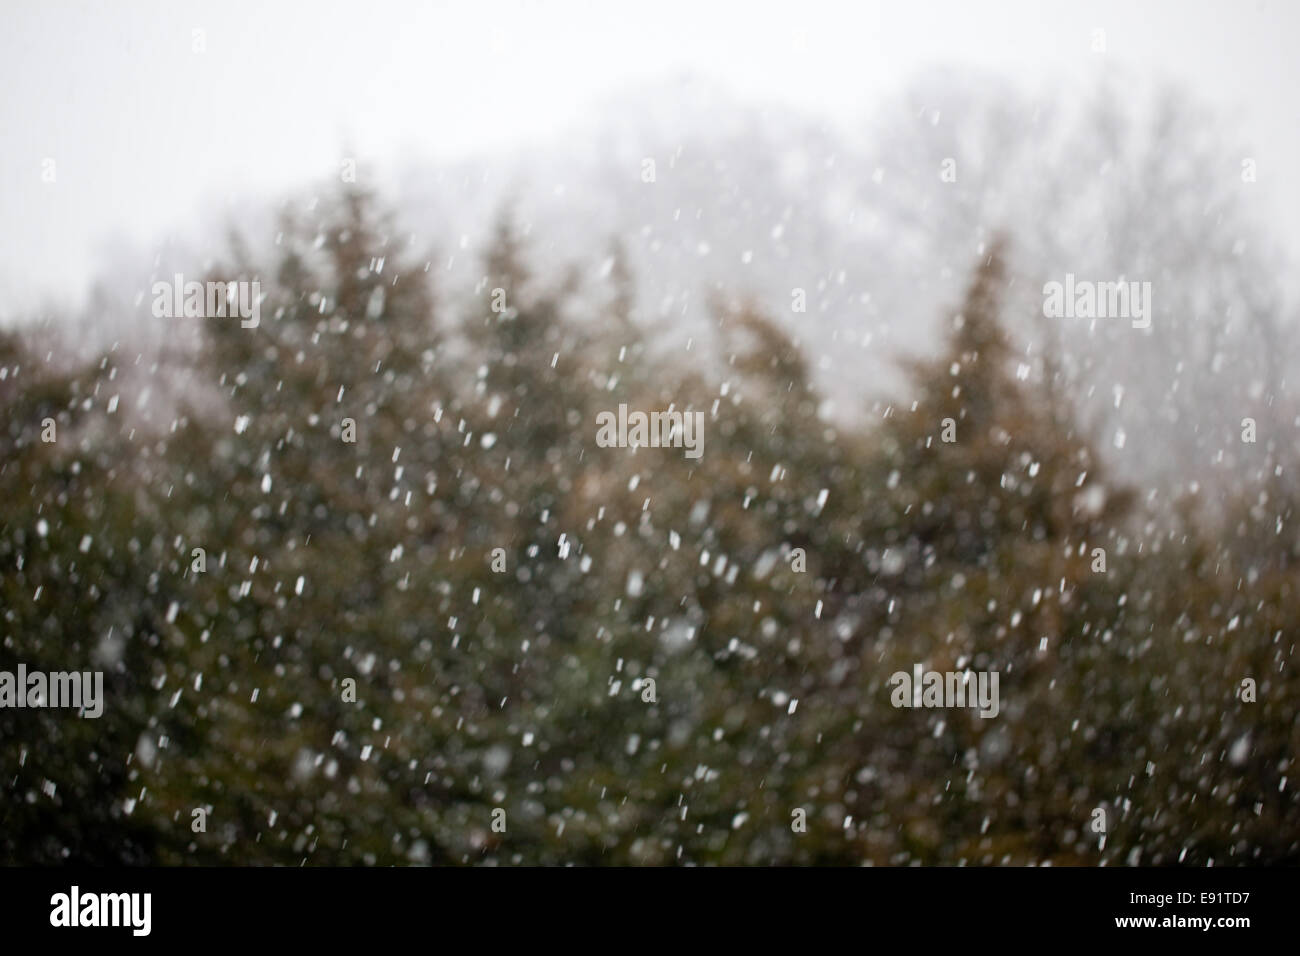 Snow falling in front of fir trees Stock Photo